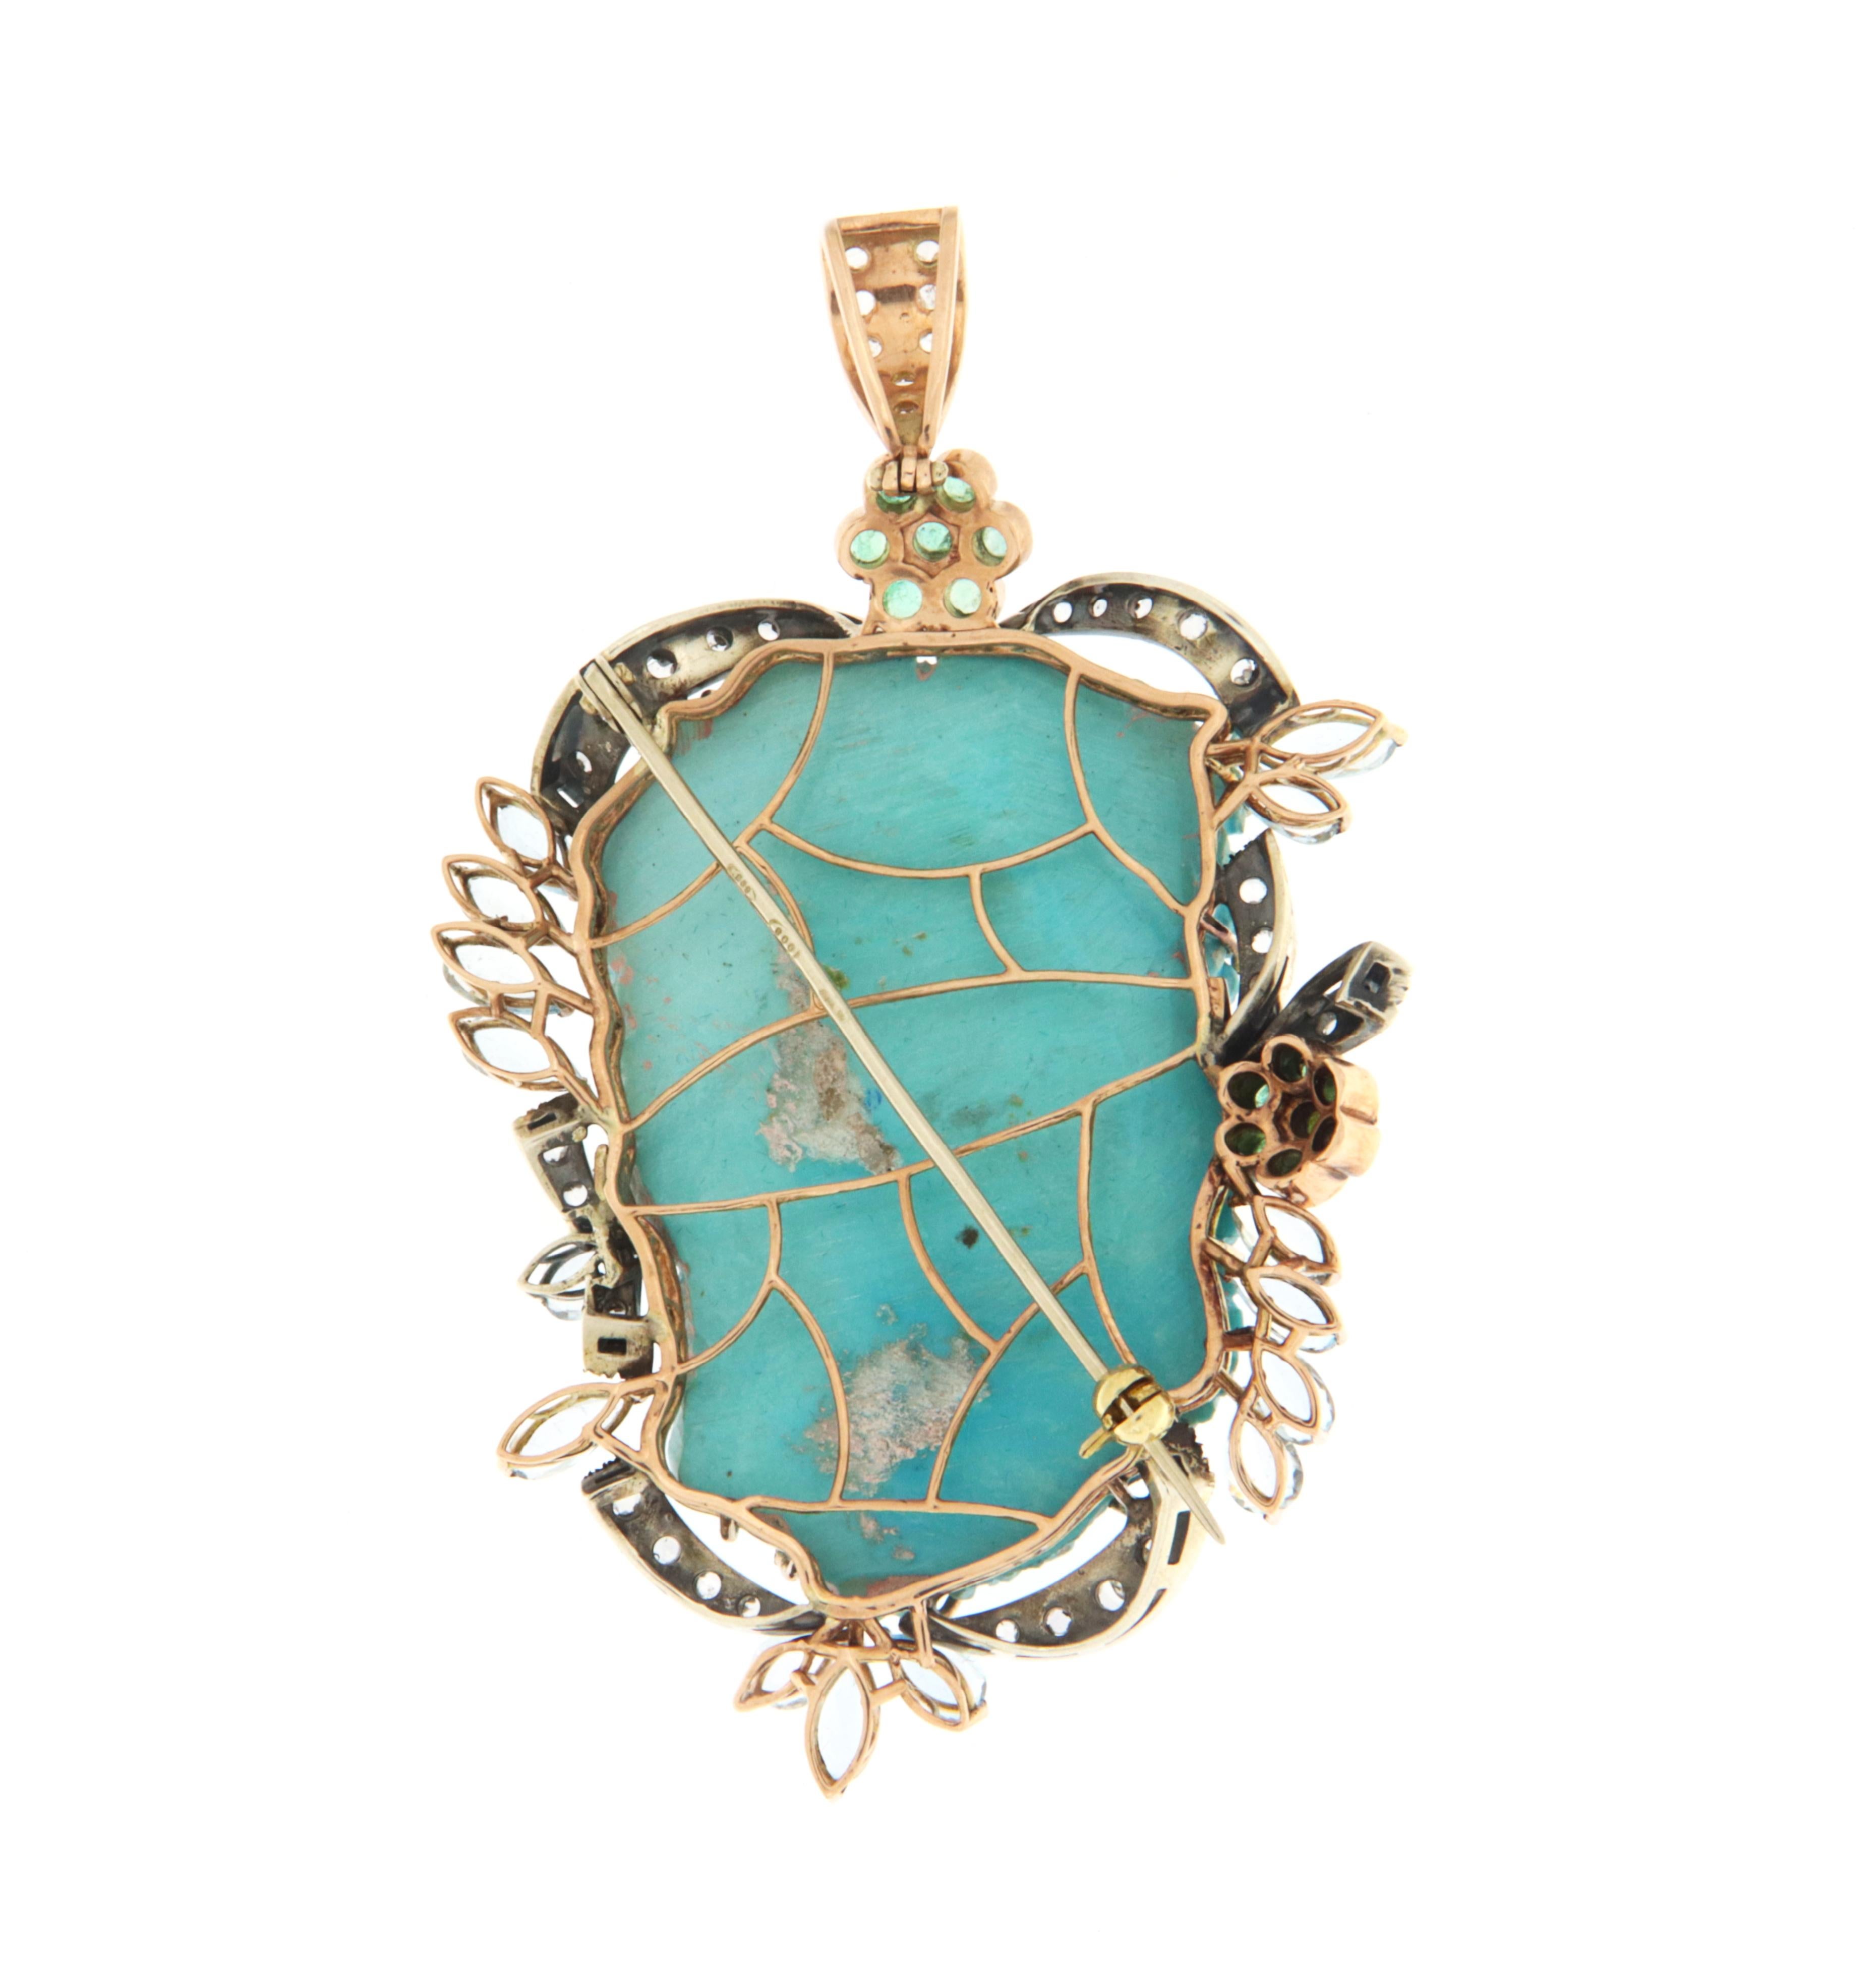 Uncut Turquoise Diamonds Aquamarine 14 Karat Yellow Gold Pendant Necklace and Brooch For Sale